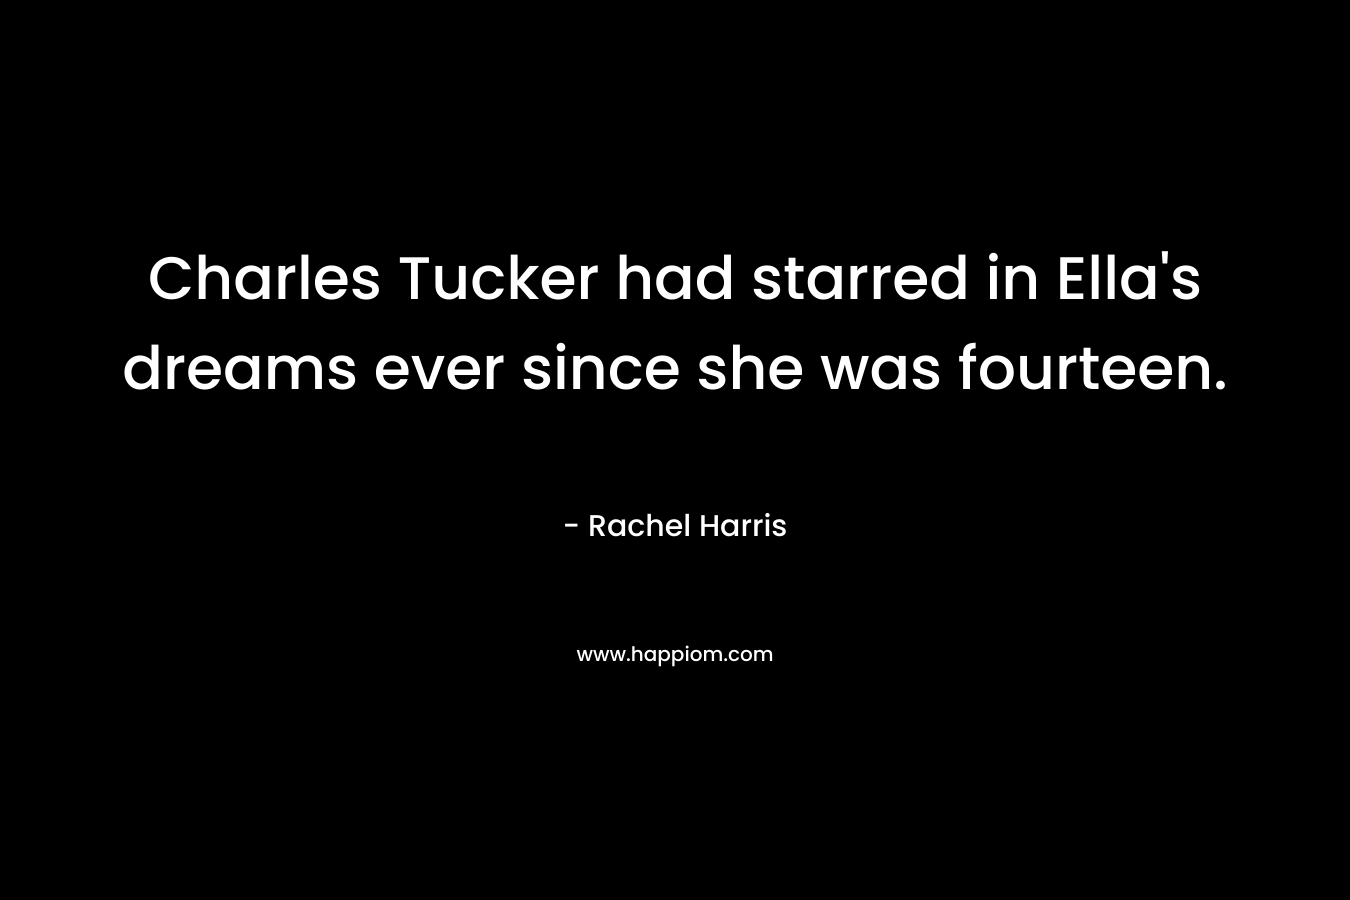 Charles Tucker had starred in Ella's dreams ever since she was fourteen.